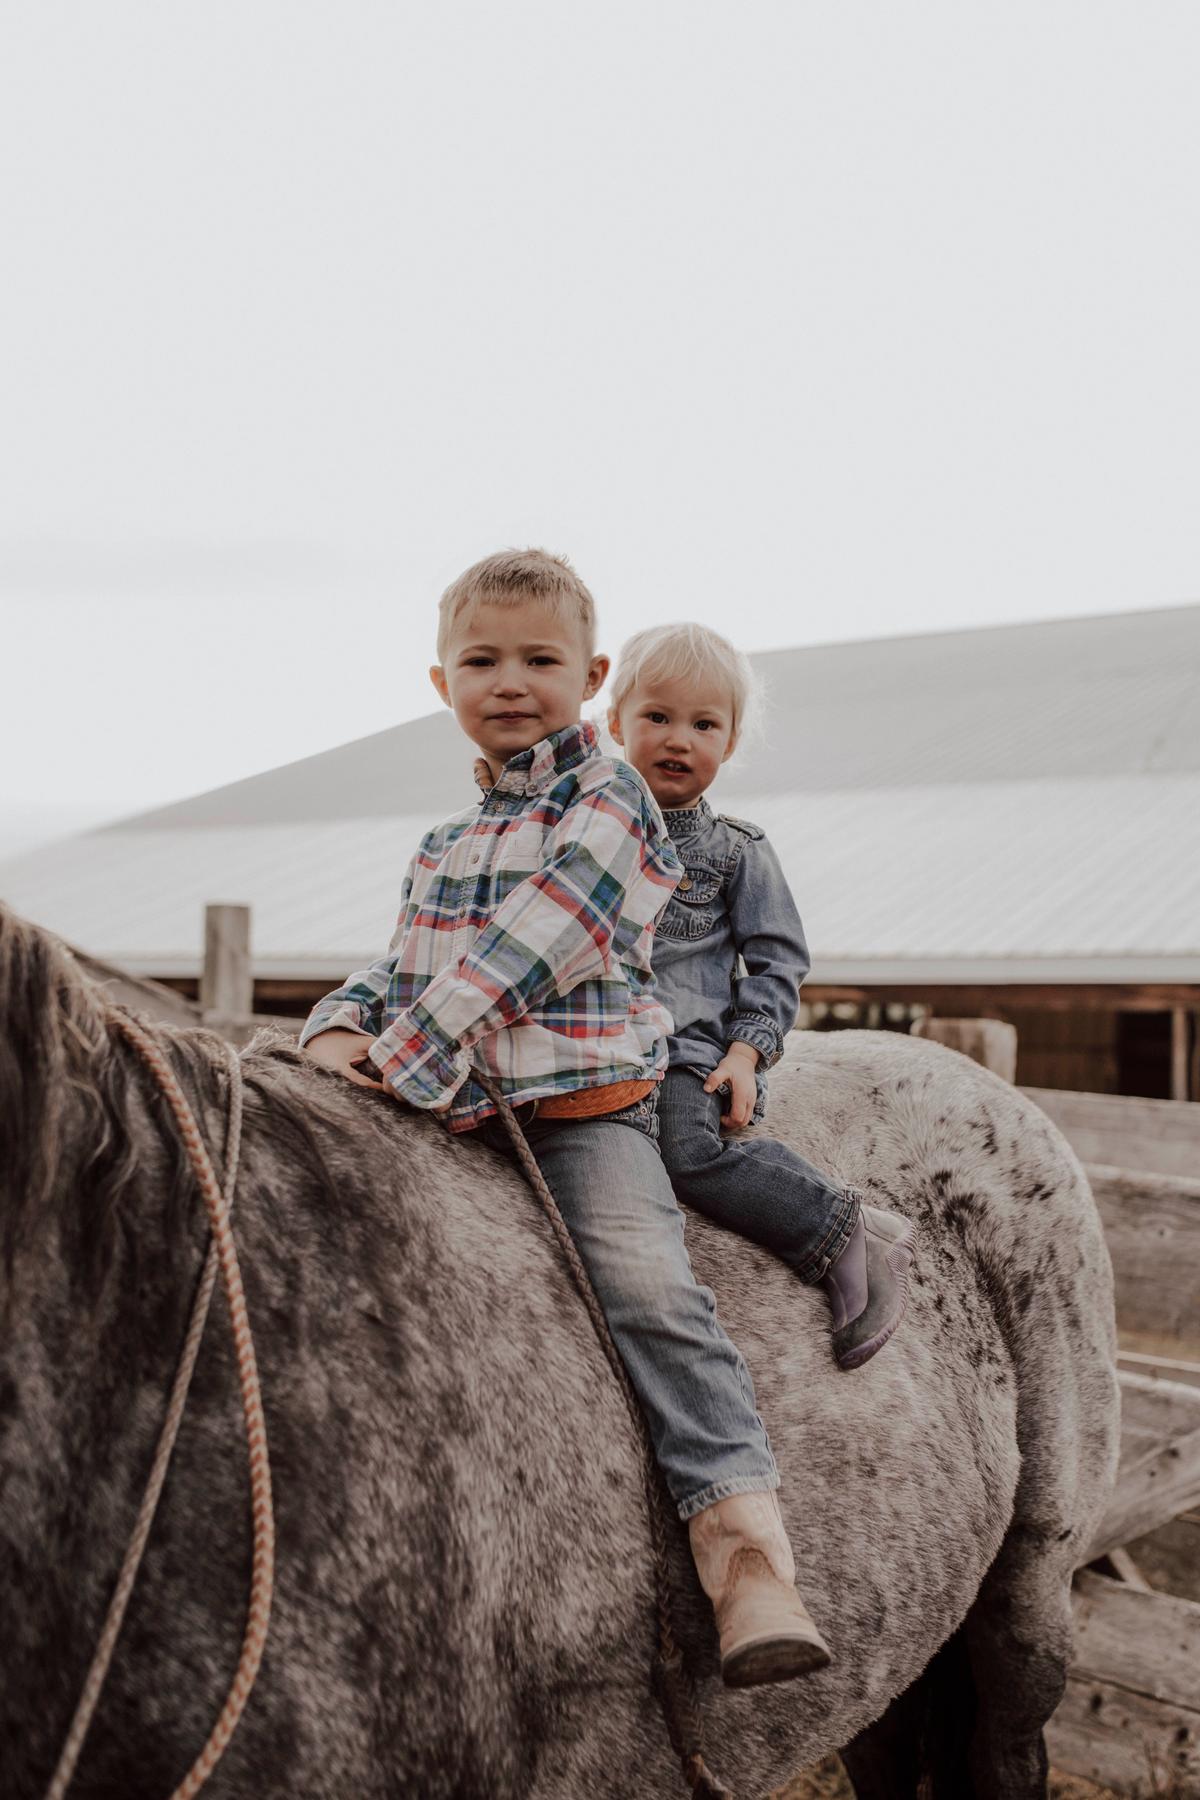 (Courtesy of Box T Photography by Tanya Chappell via <a href="https://www.instagram.com/fortysevenranchco/">Vanessa Ould</a>)